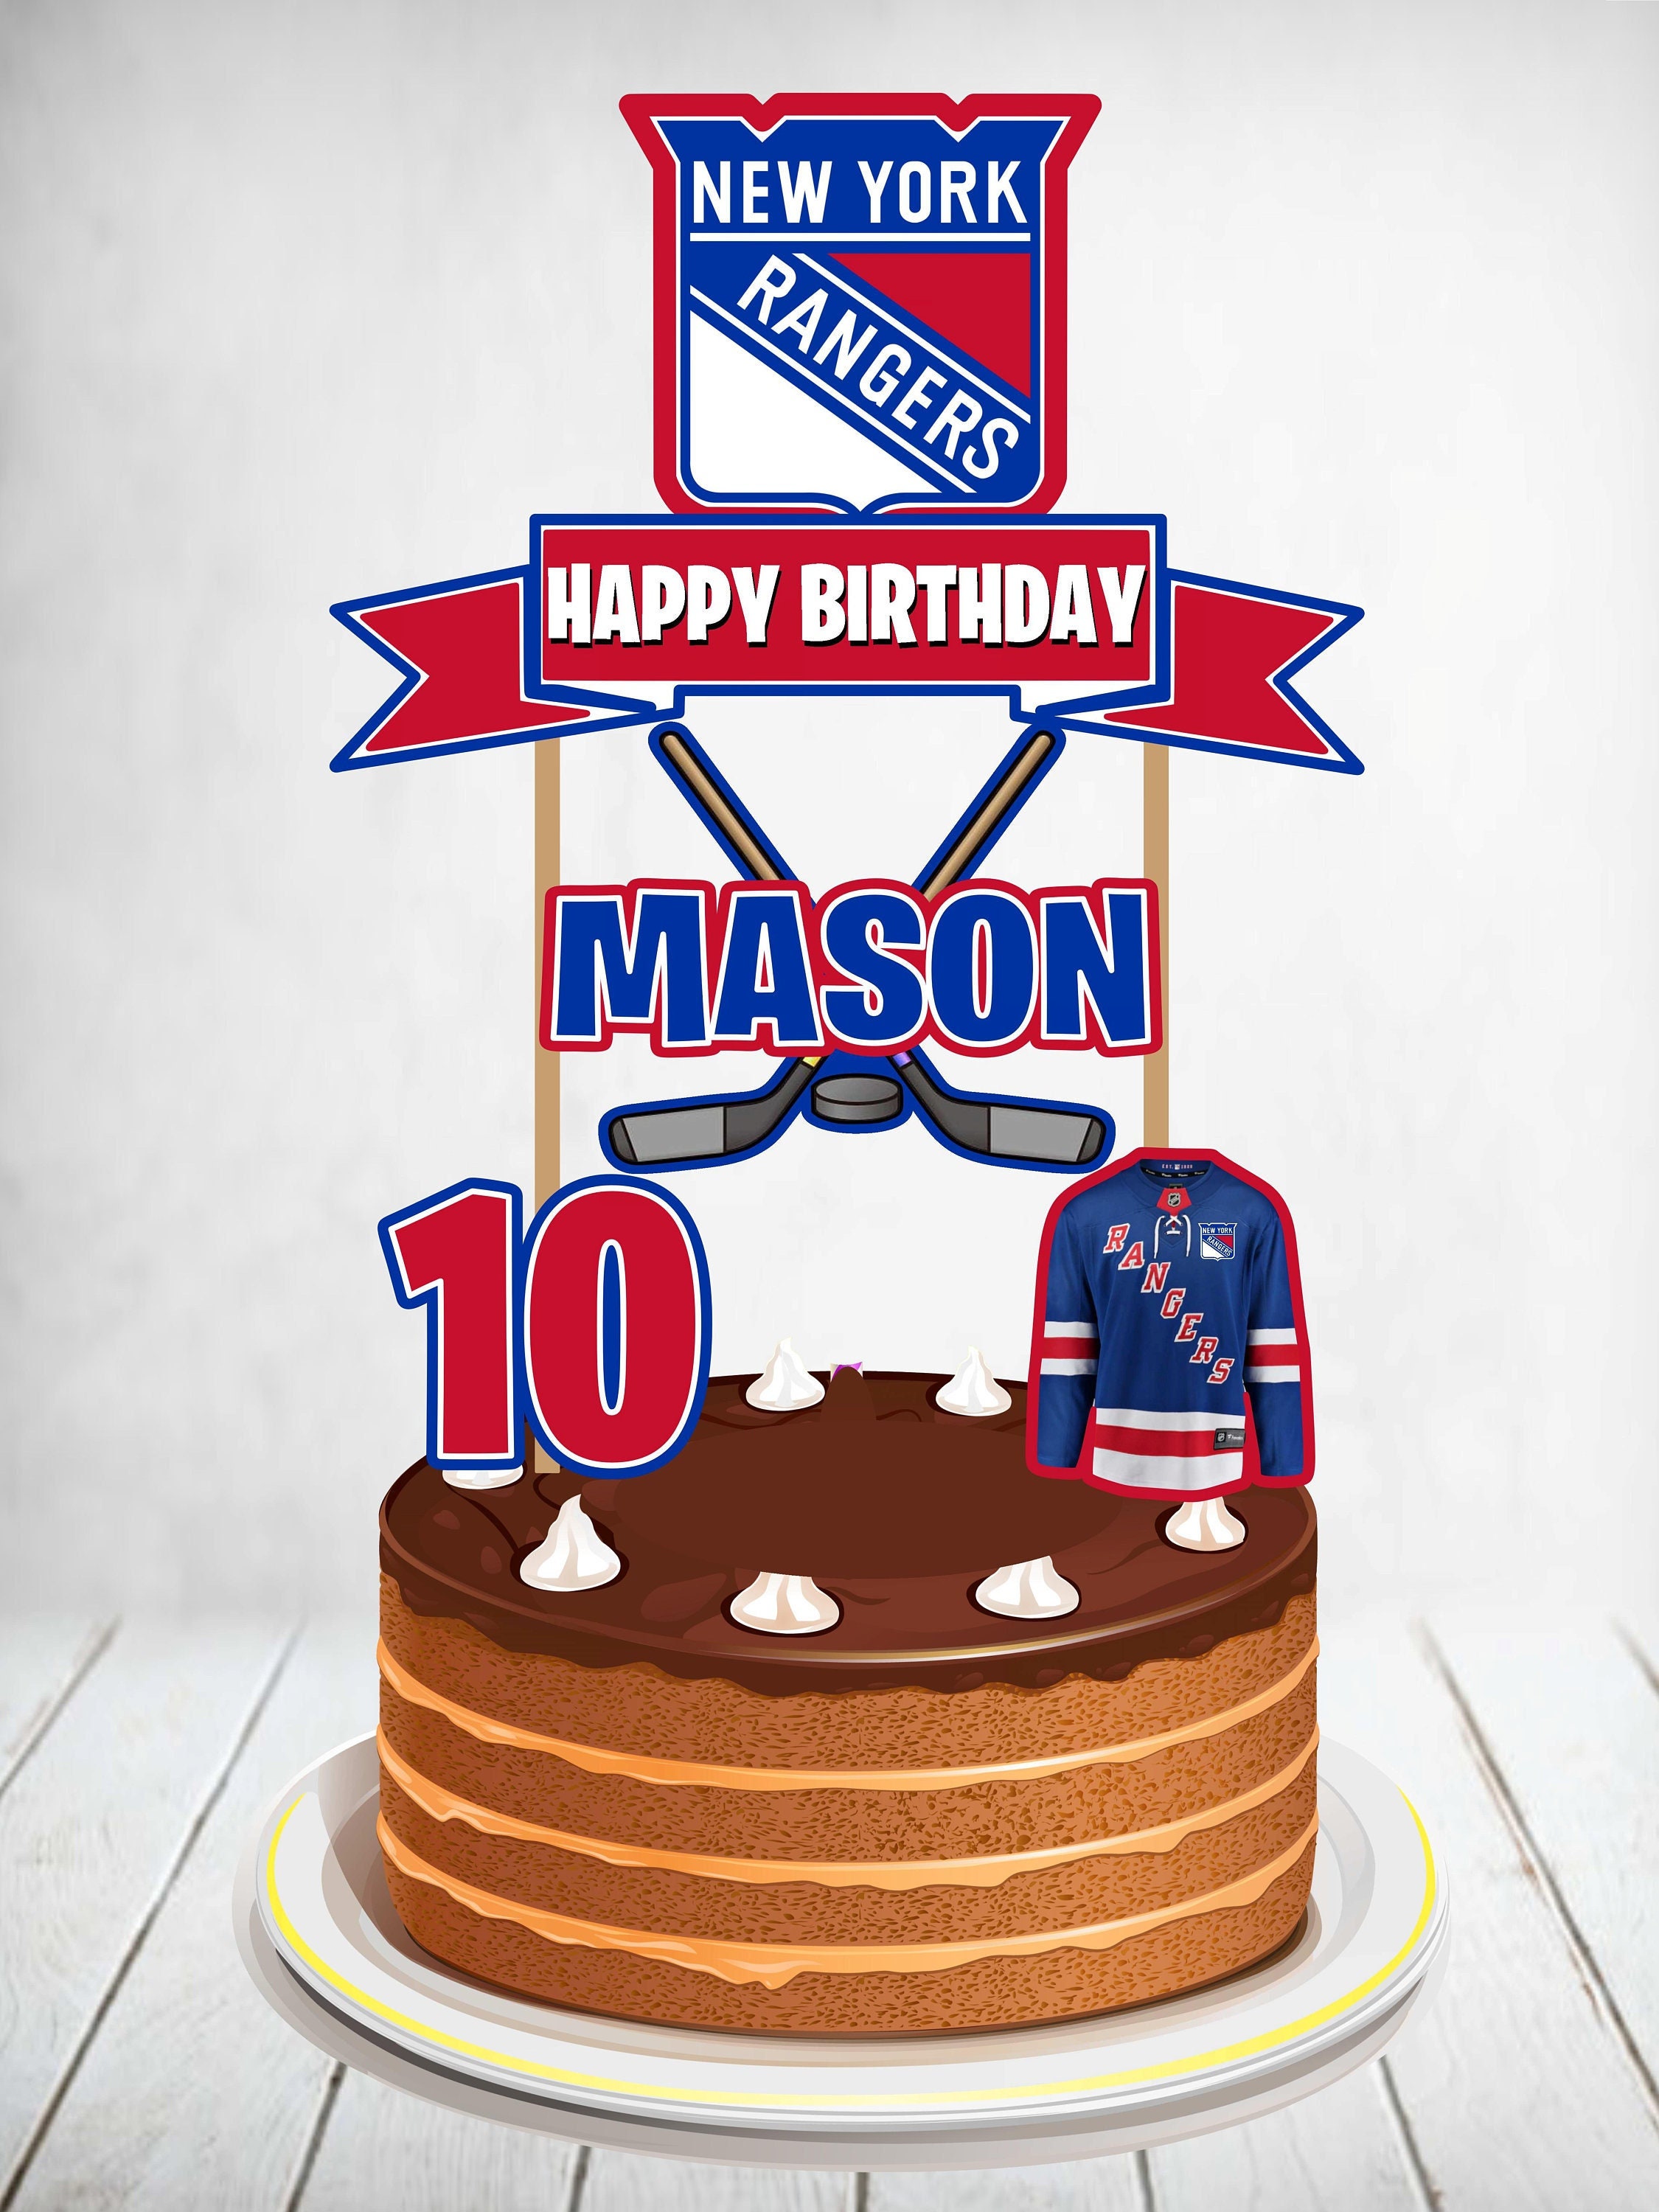 Rangers Personalized Cake Topper 1/4 8.5 x 11.5 Inches Birthday Cake Topper